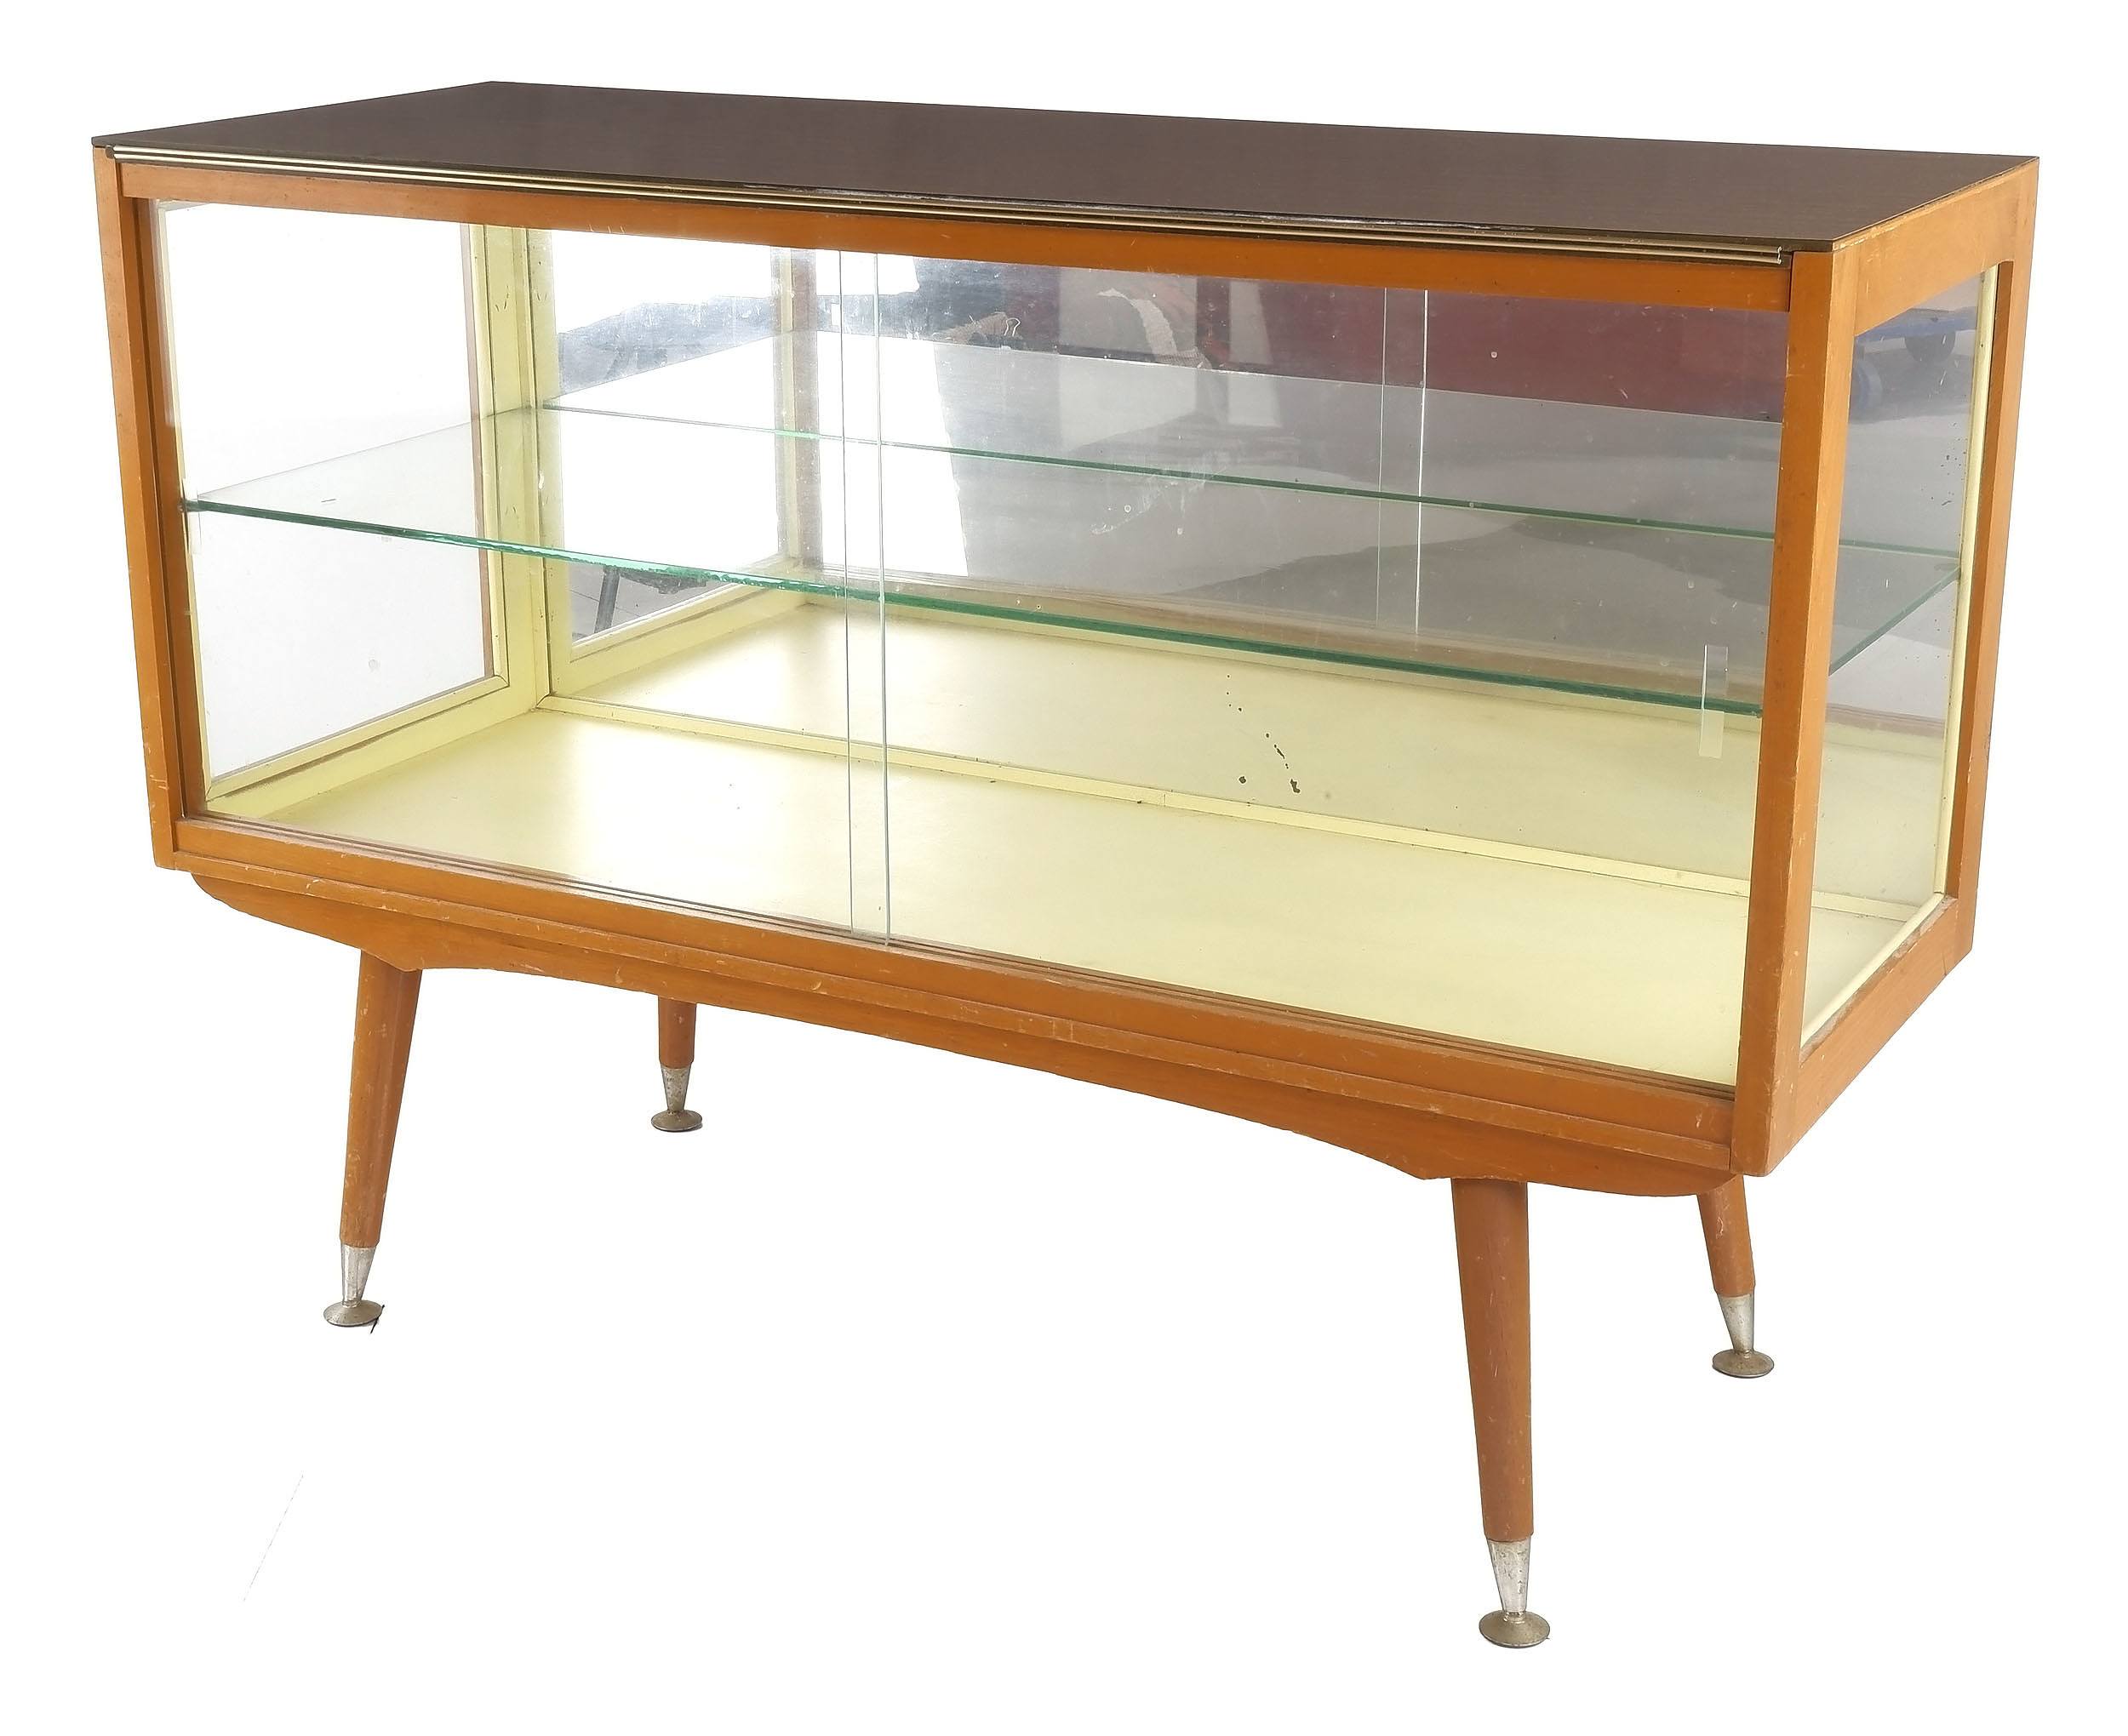 Retro Display Cabinet with Glass - Lot 1134786 | ALLBIDS